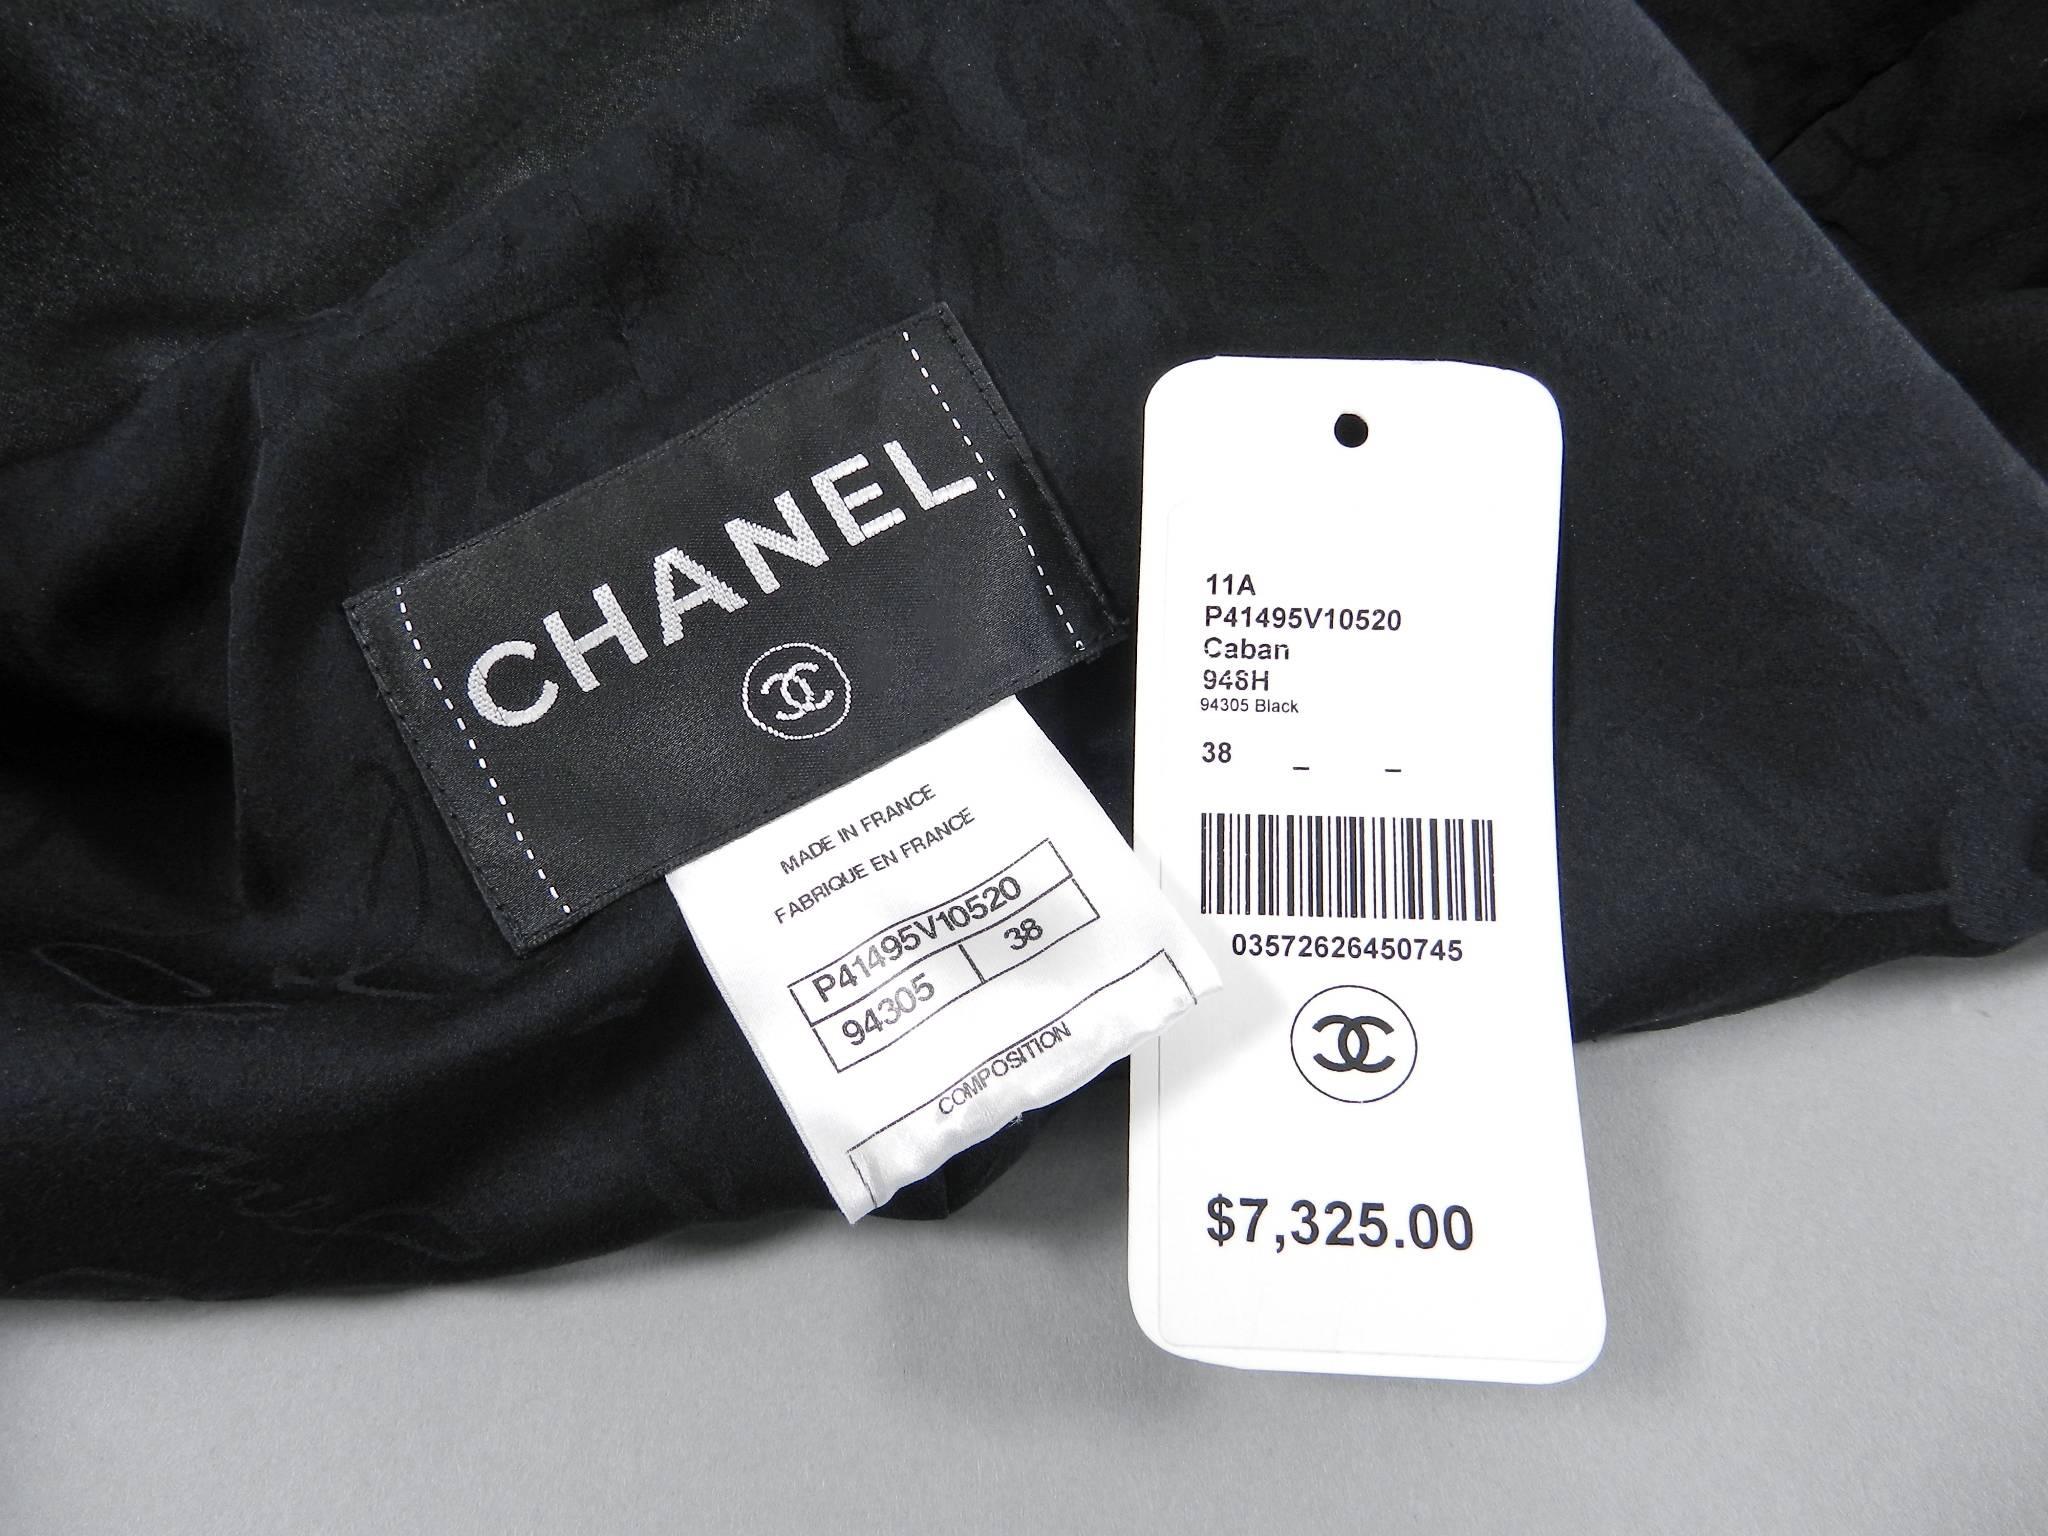 Chanel 11A Black Silk Satin Caban Jacket with Square Silver Buttons In Excellent Condition For Sale In Toronto, ON